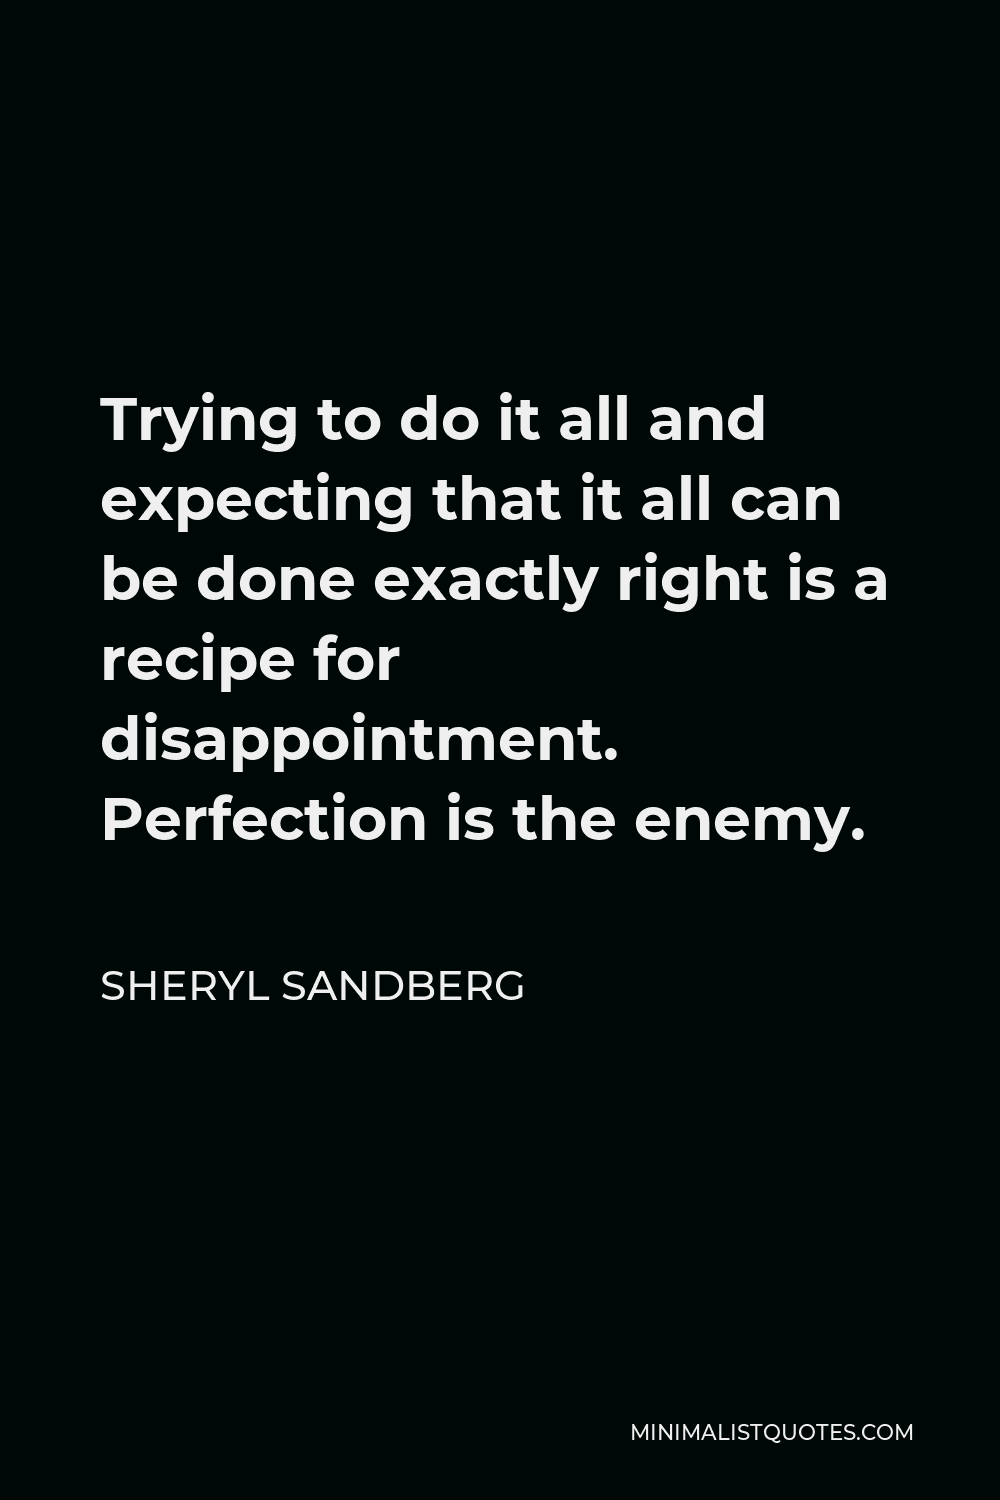 Sheryl Sandberg Quote - Trying to do it all and expecting that it all can be done exactly right is a recipe for disappointment. Perfection is the enemy.